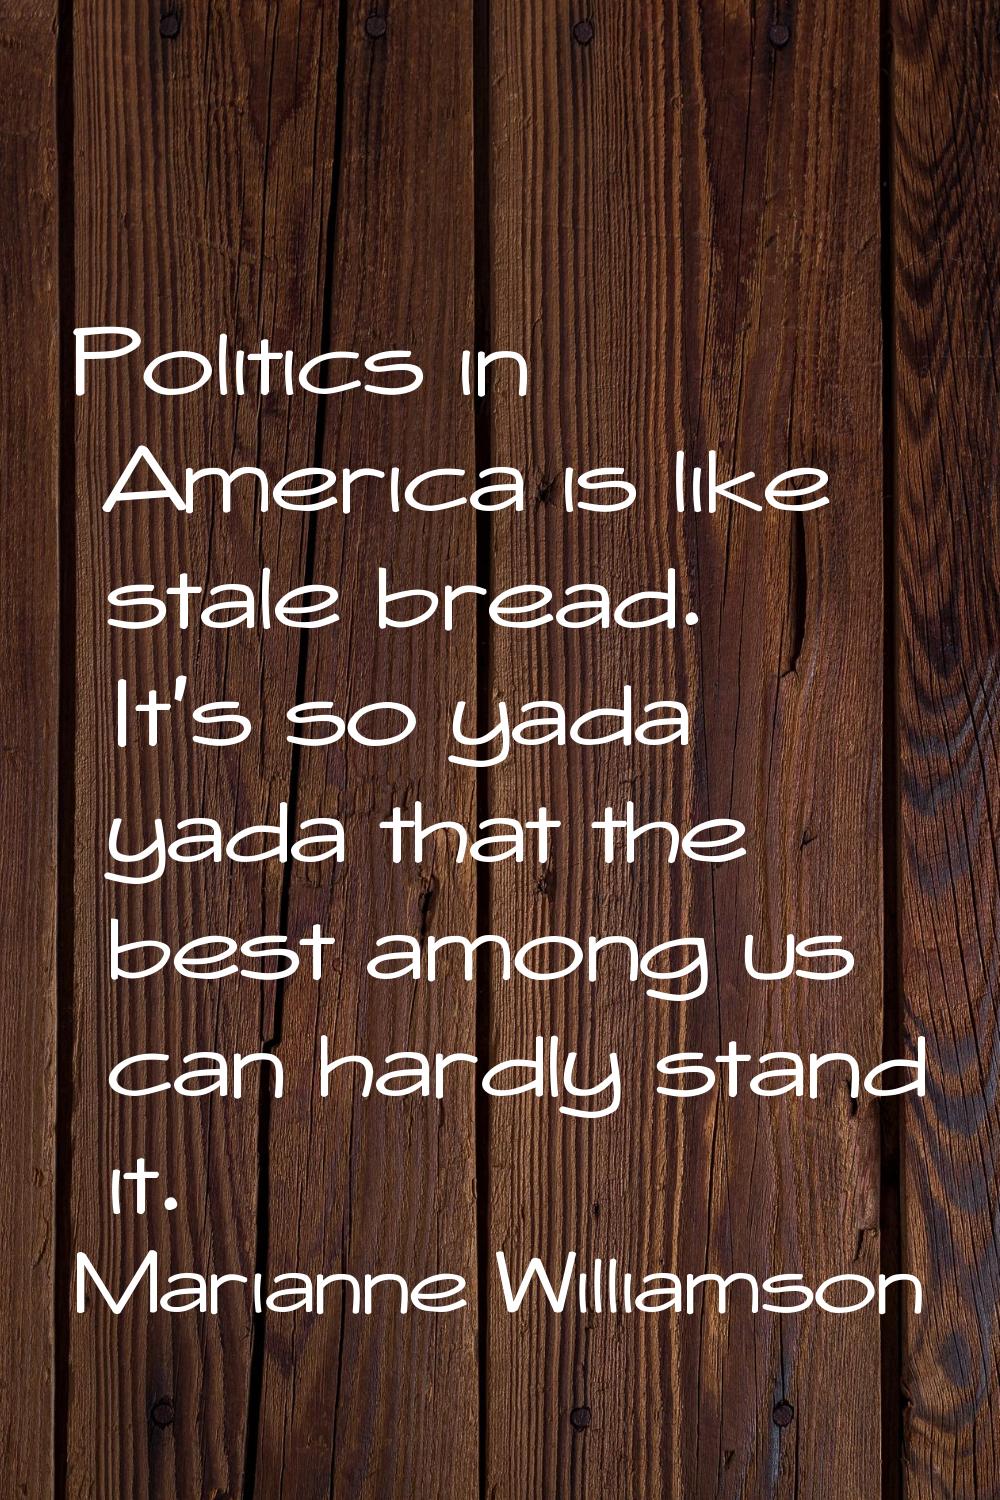 Politics in America is like stale bread. It's so yada yada that the best among us can hardly stand 